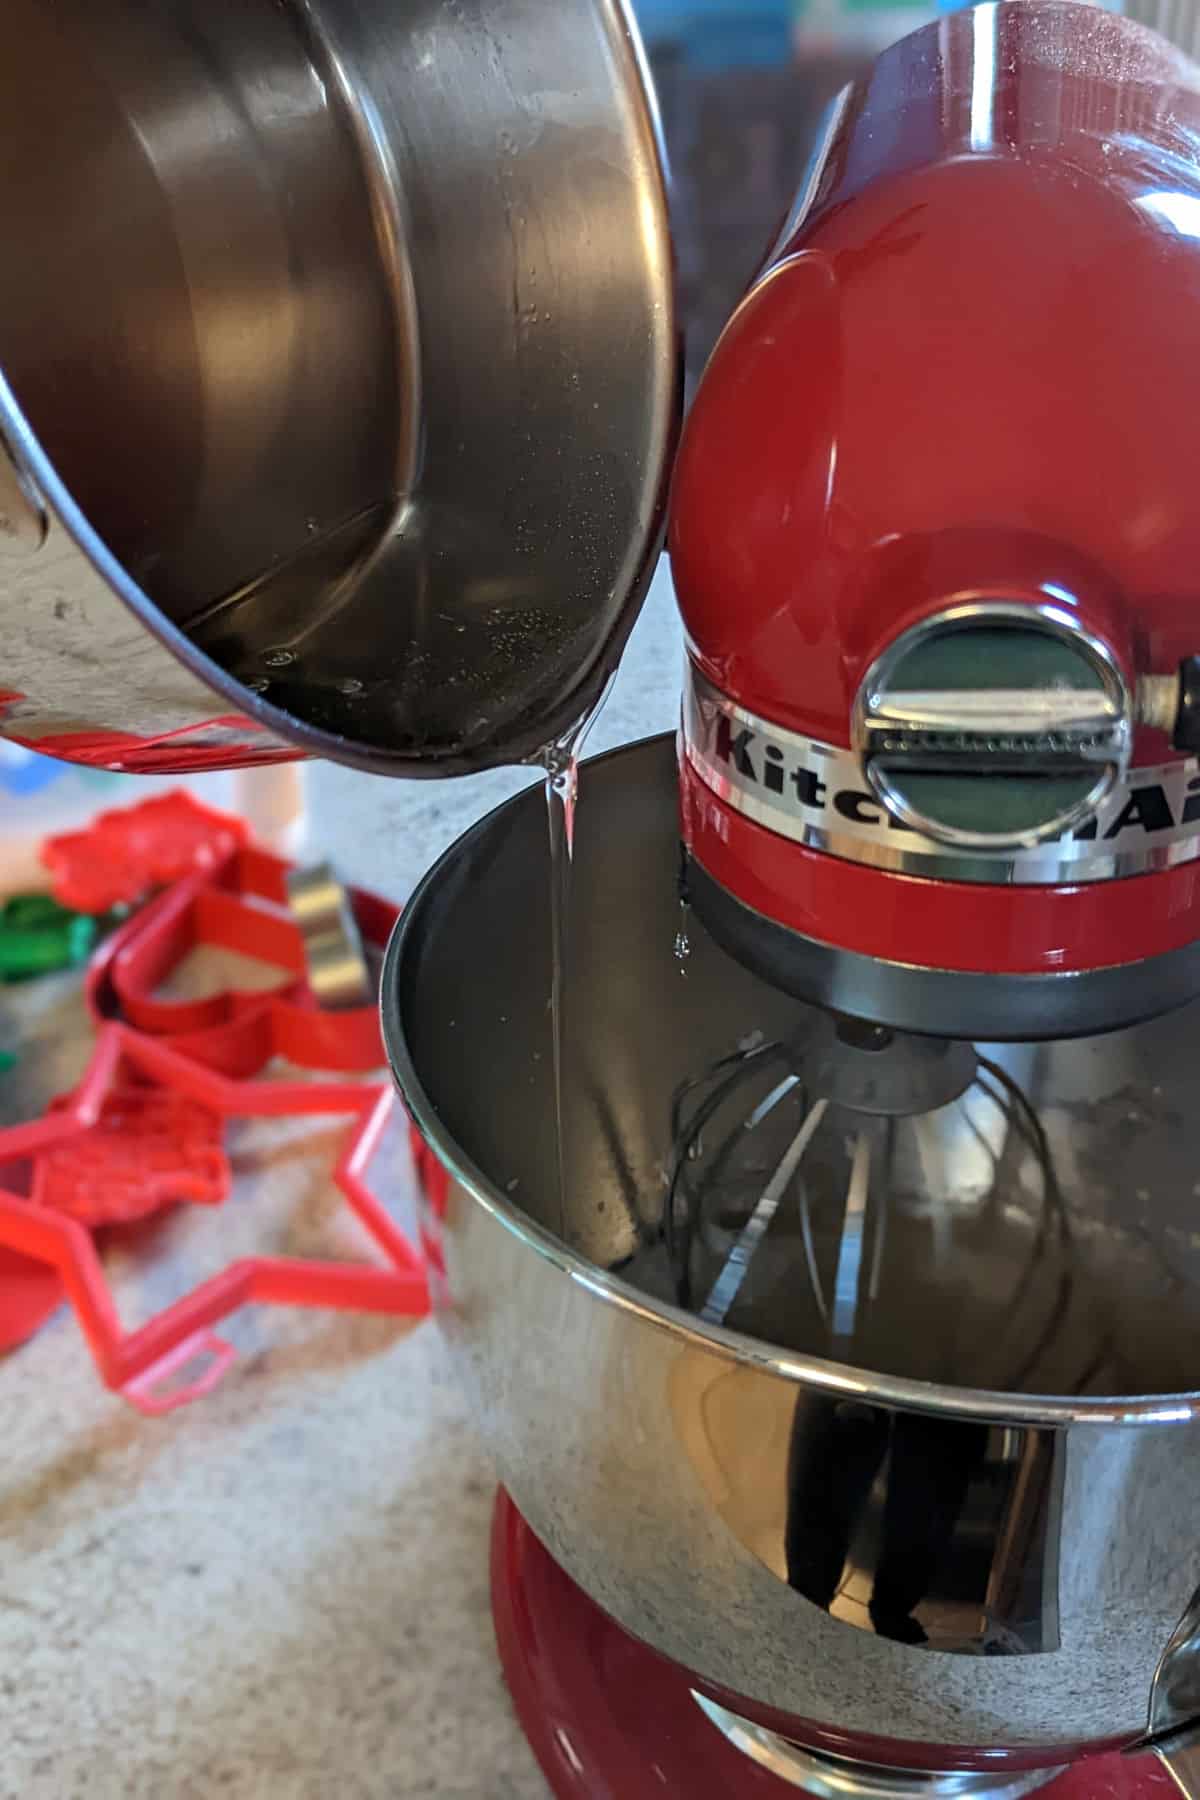 drizzling sugar syrup into stand mixer bowl while it runs